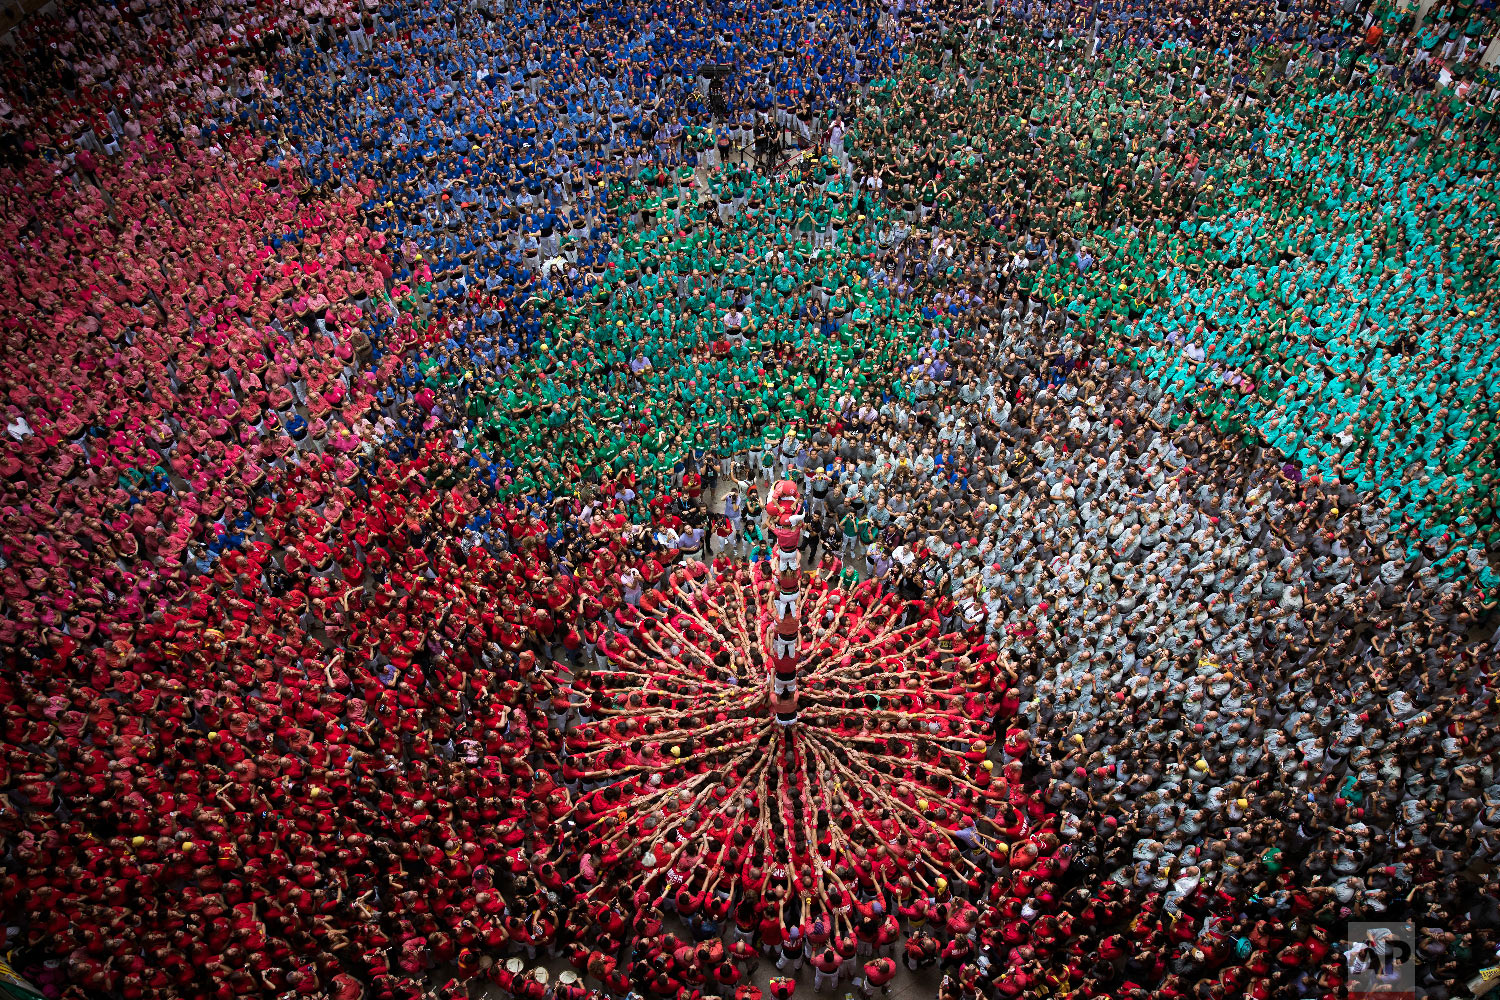  Members of the "Colla Joves Xiquets de Valls" complete their human tower during the 27th Human Tower Competition in Tarragona, Spain on Oct. 7, 2018. (AP Photo/Emilio Morenatti) 